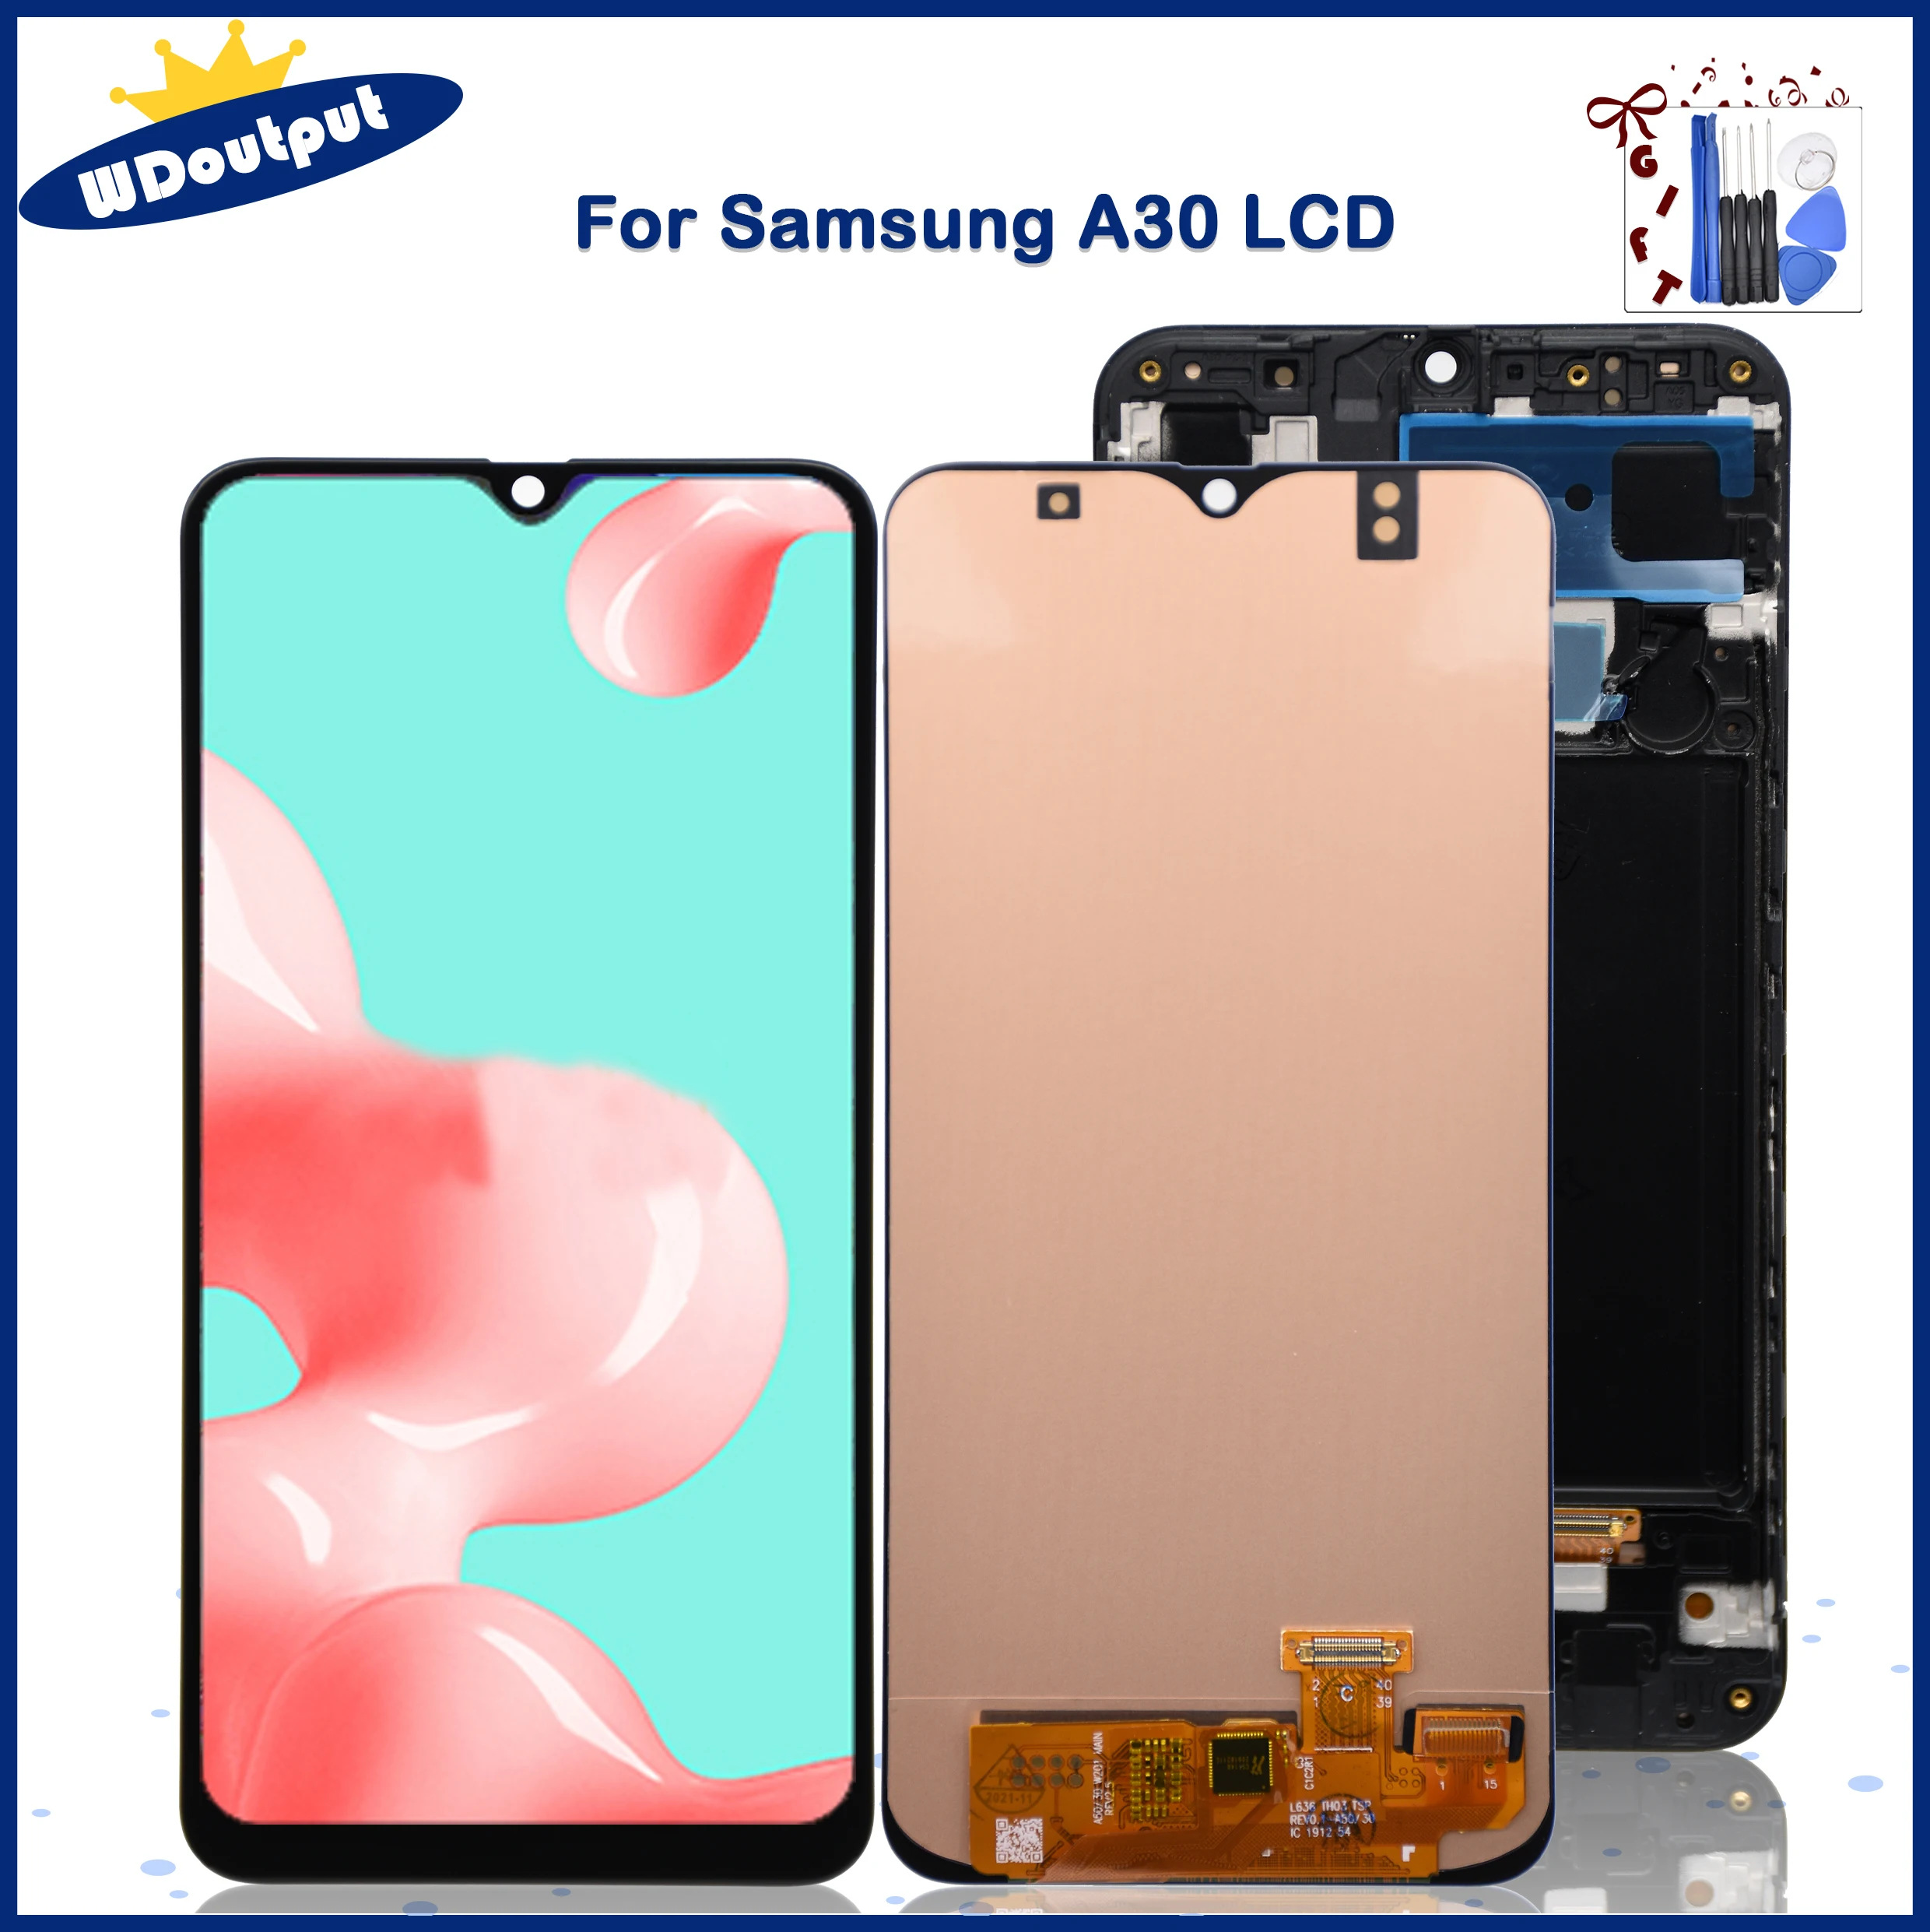 

AMOLED For Samsung Galaxy A30 LCD Display Touch Screen Digitizer Assembly For Samsung Galaxy A30 A305/DS A305F A305FD A305A LCD